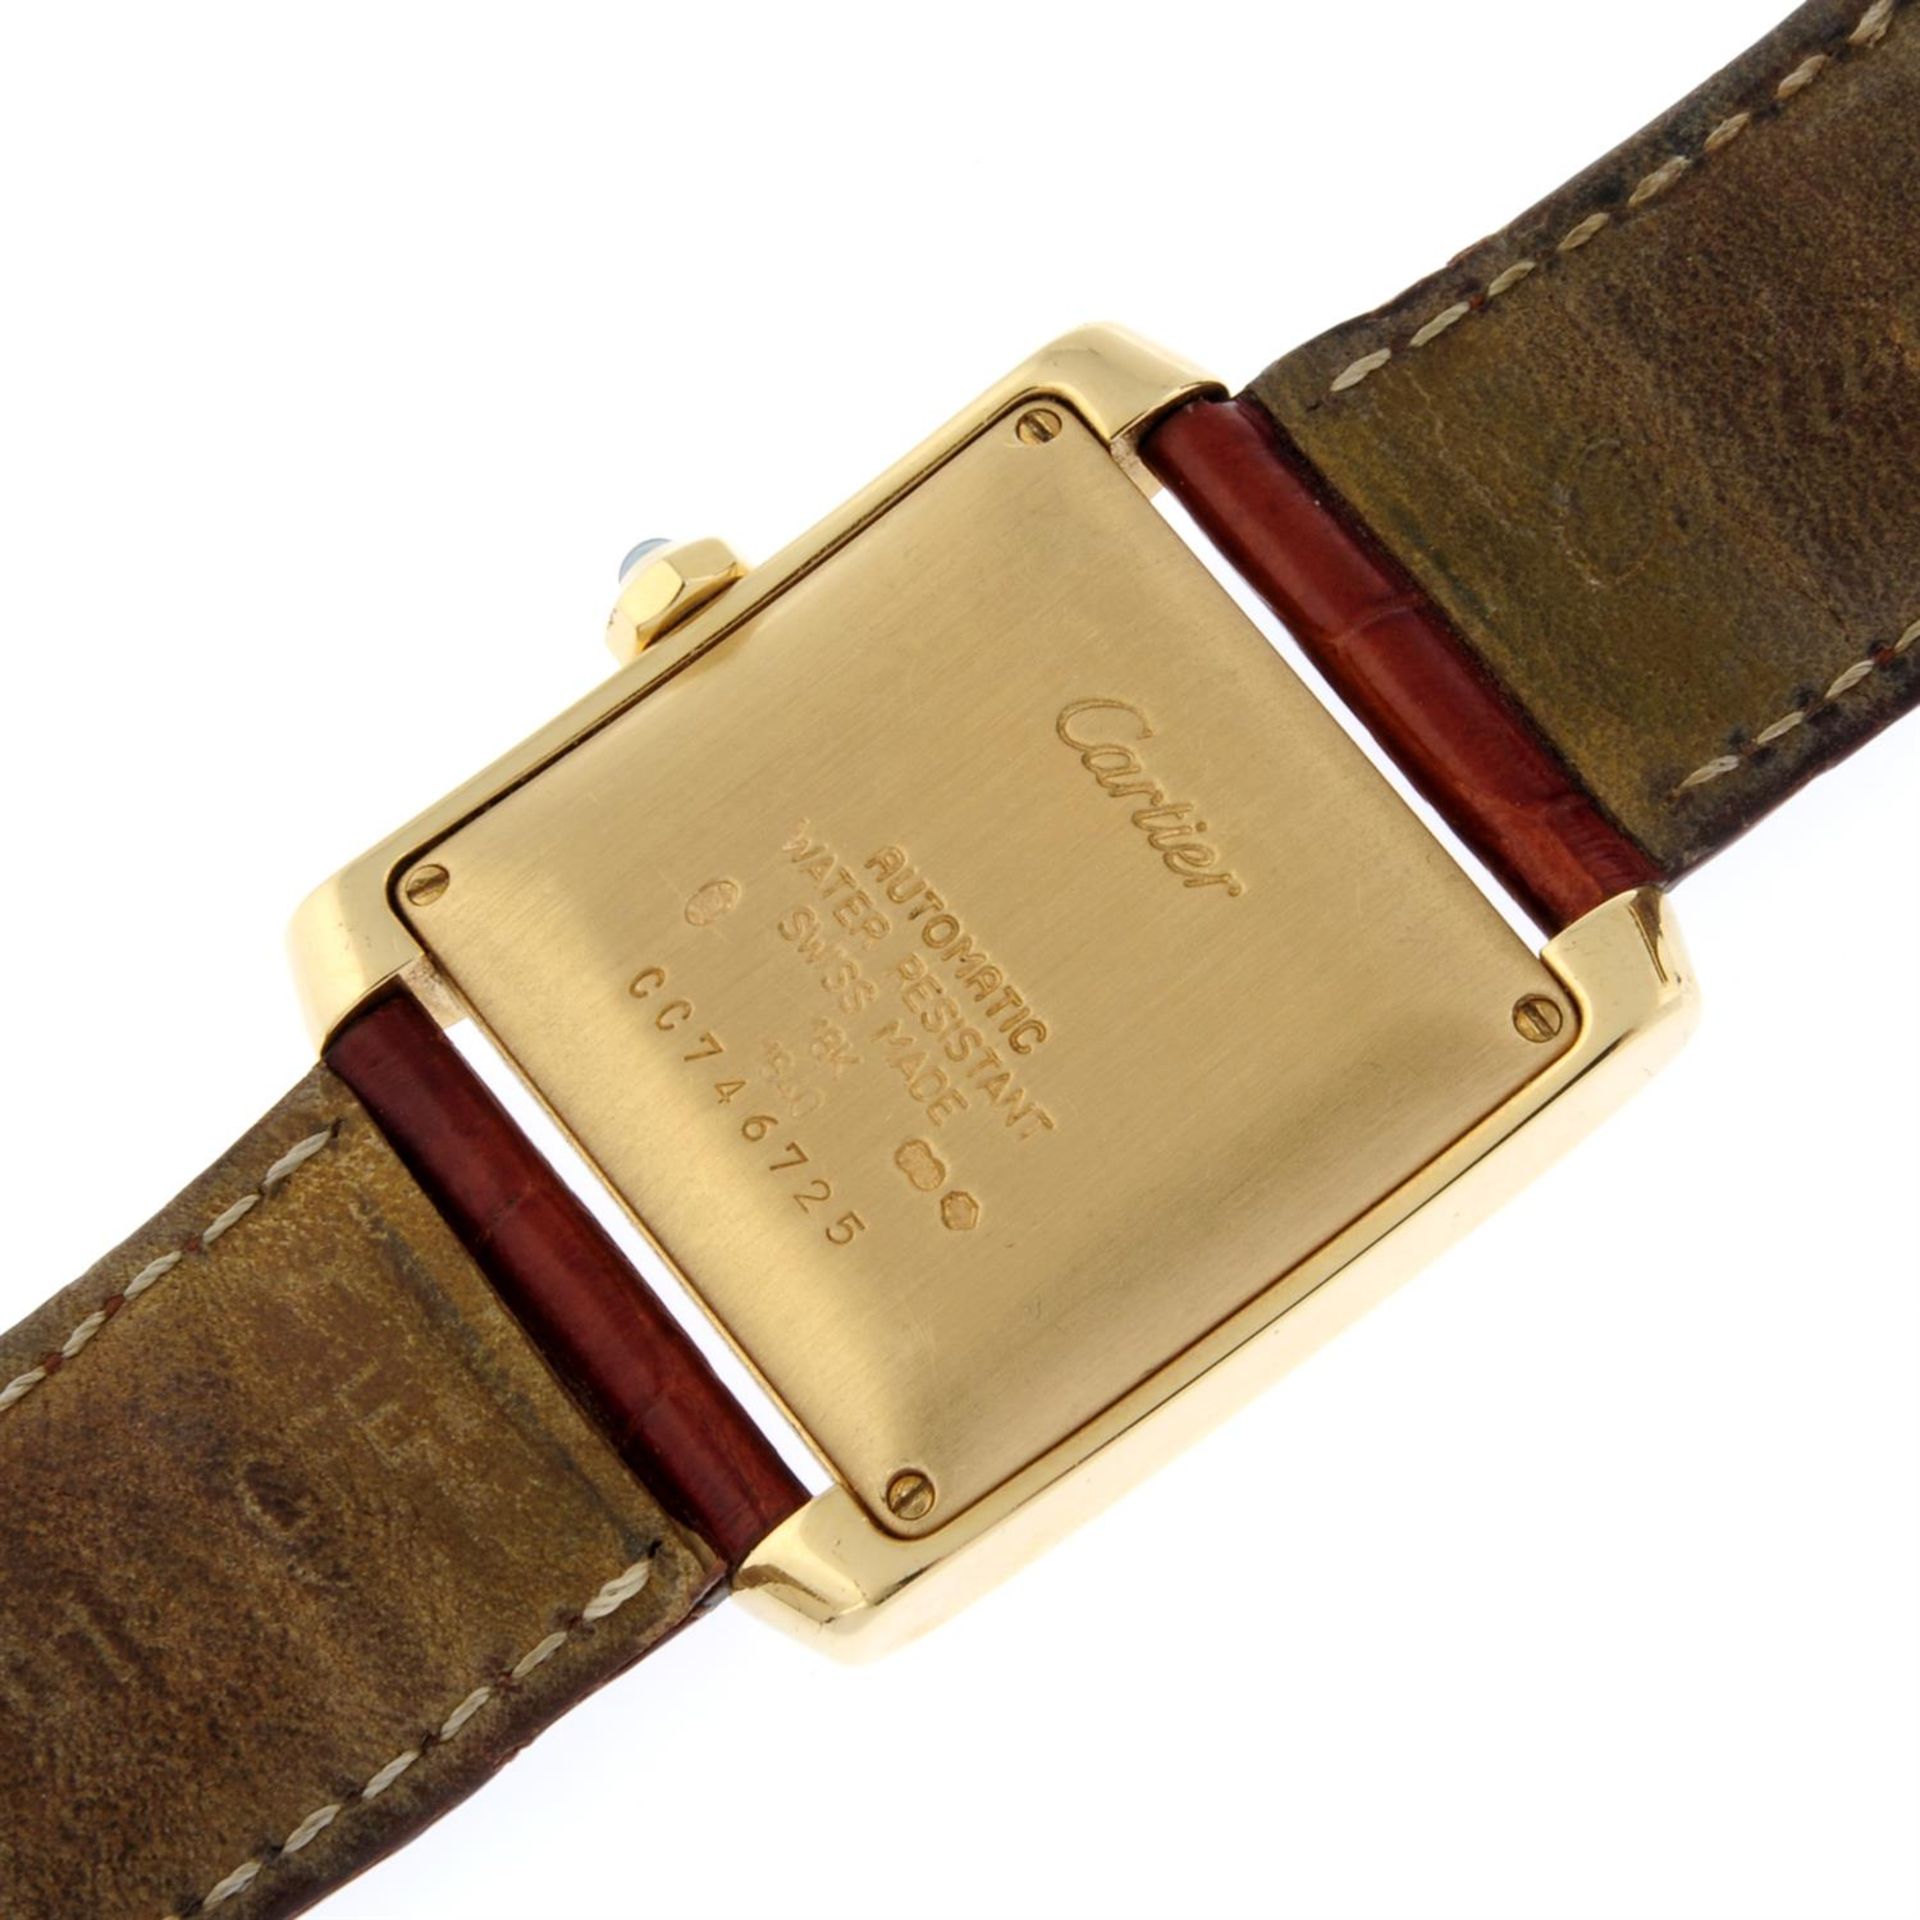 CARTIER - an 18ct yellow gold Tank Francaise 1840 wrist watch, 28x24mm. - Image 4 of 5